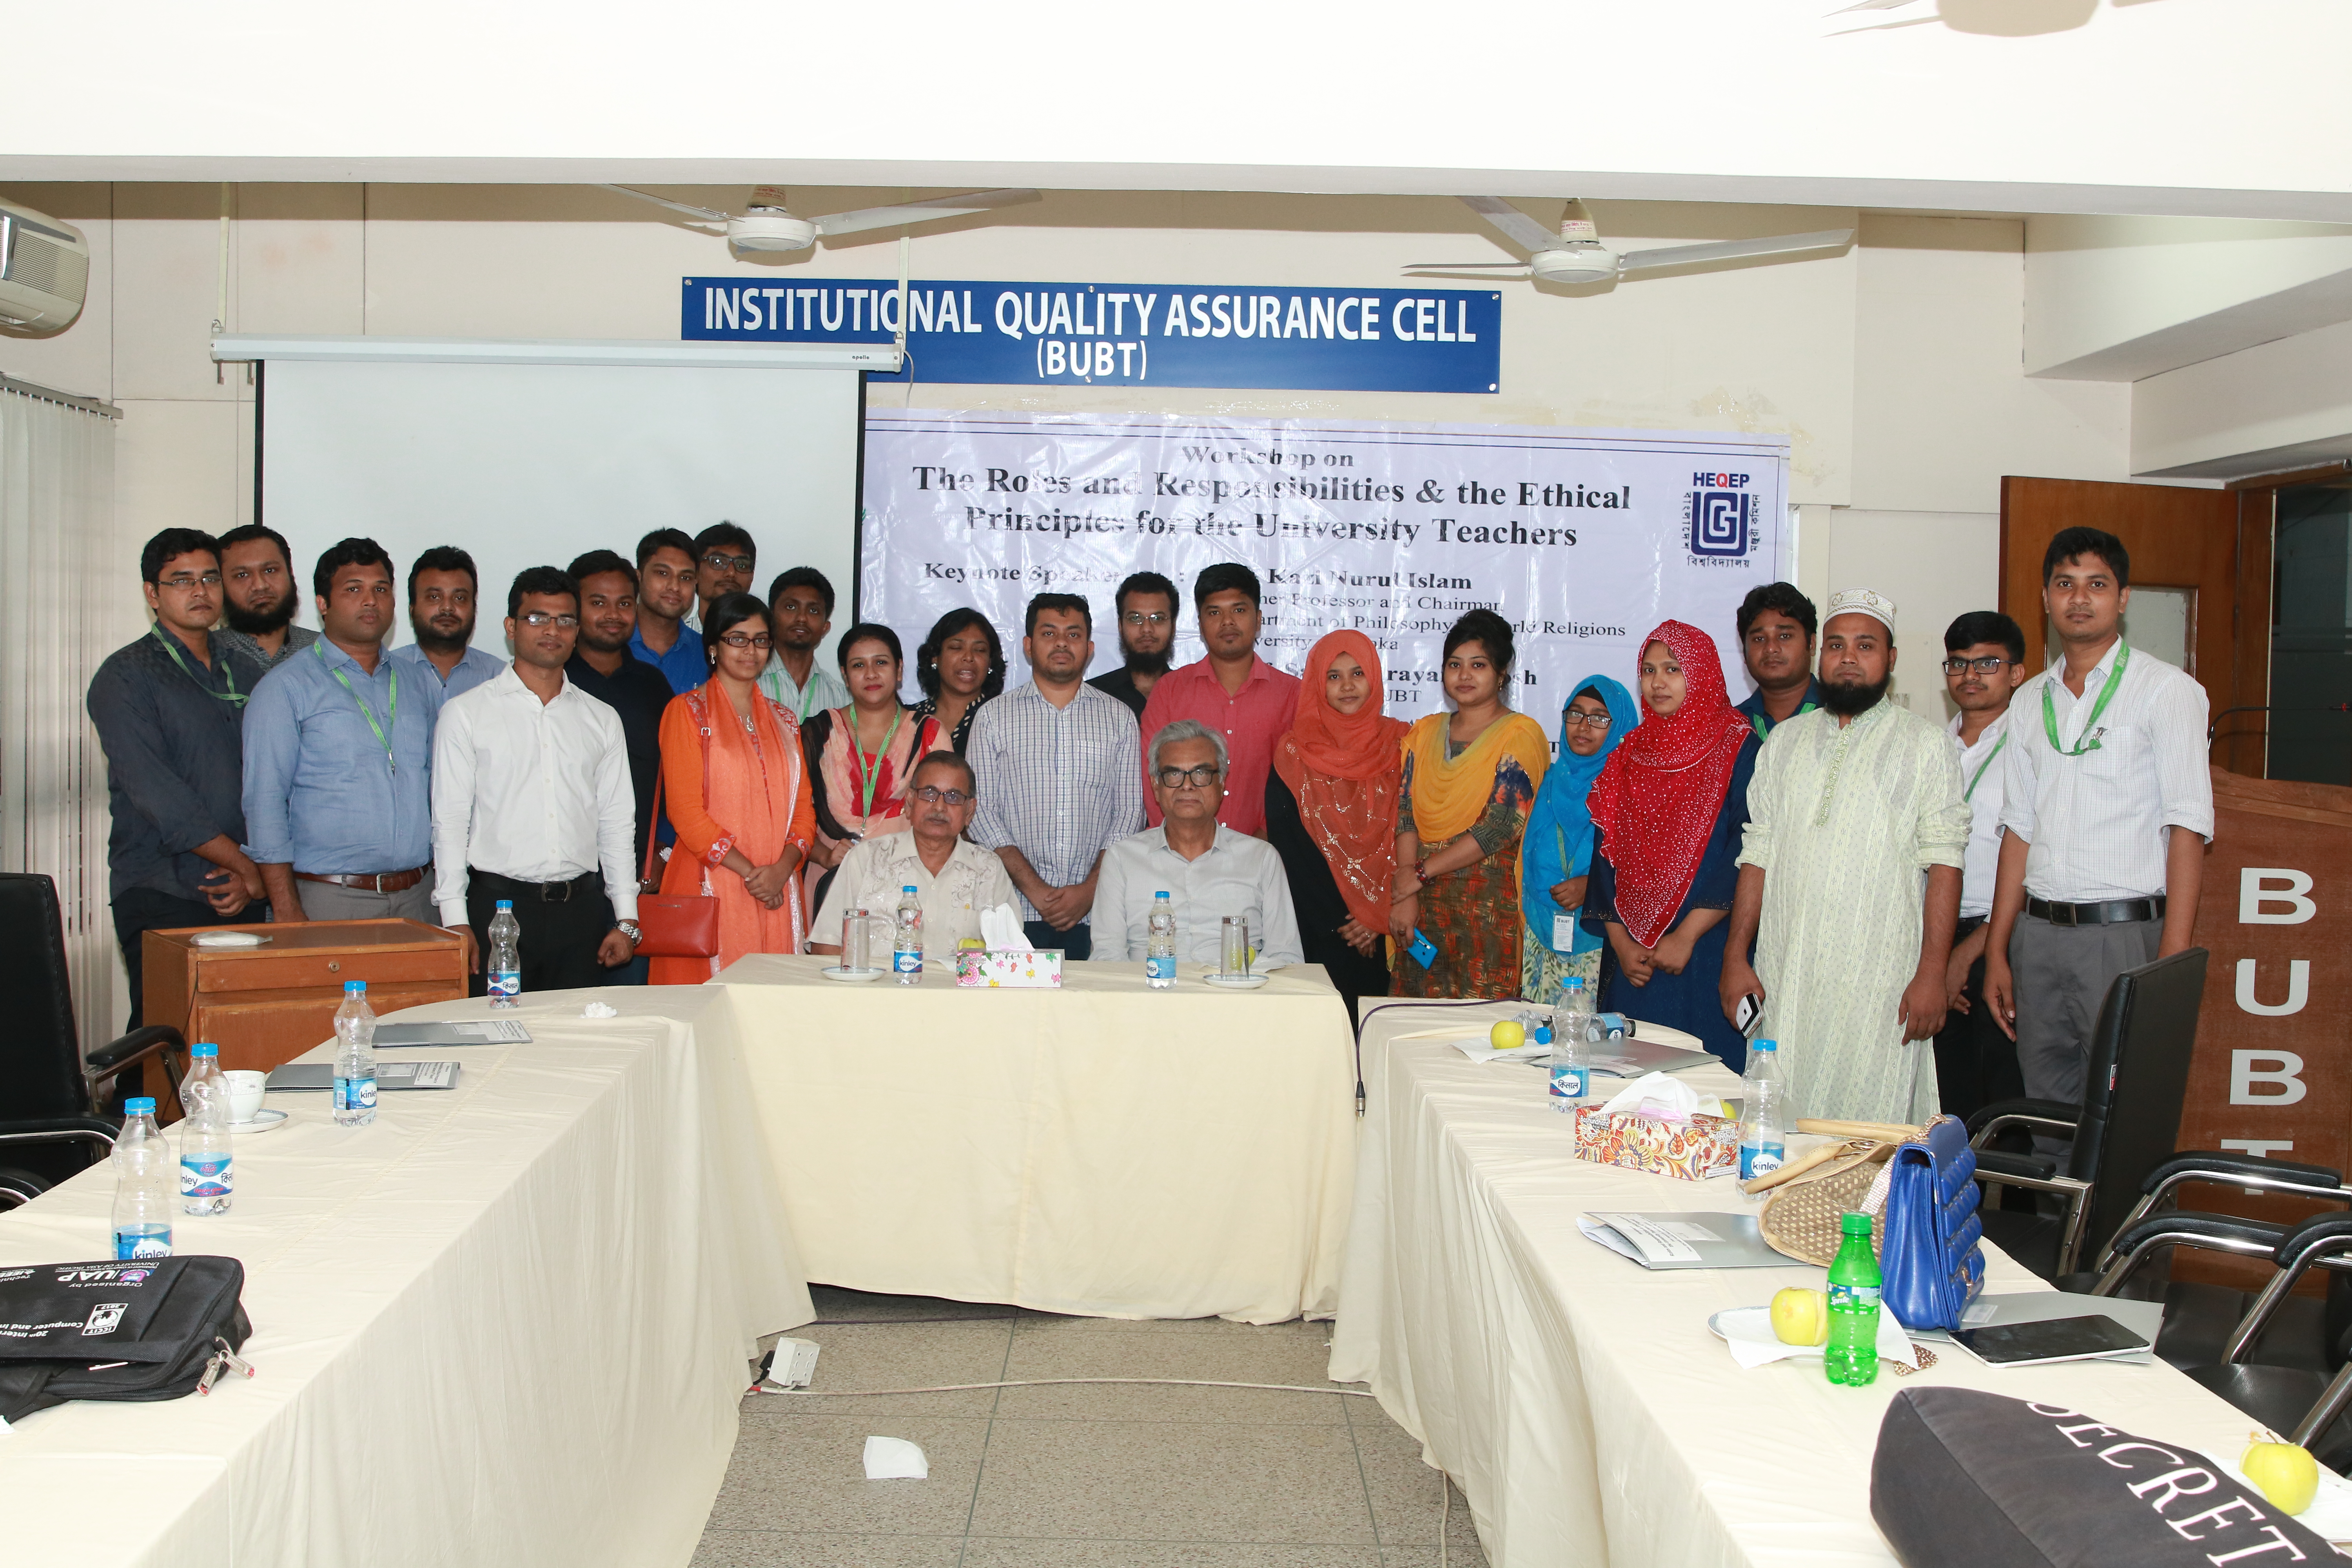 Workshop on the Roles and Responsibilities & the Ethical Principles for the University Teachers